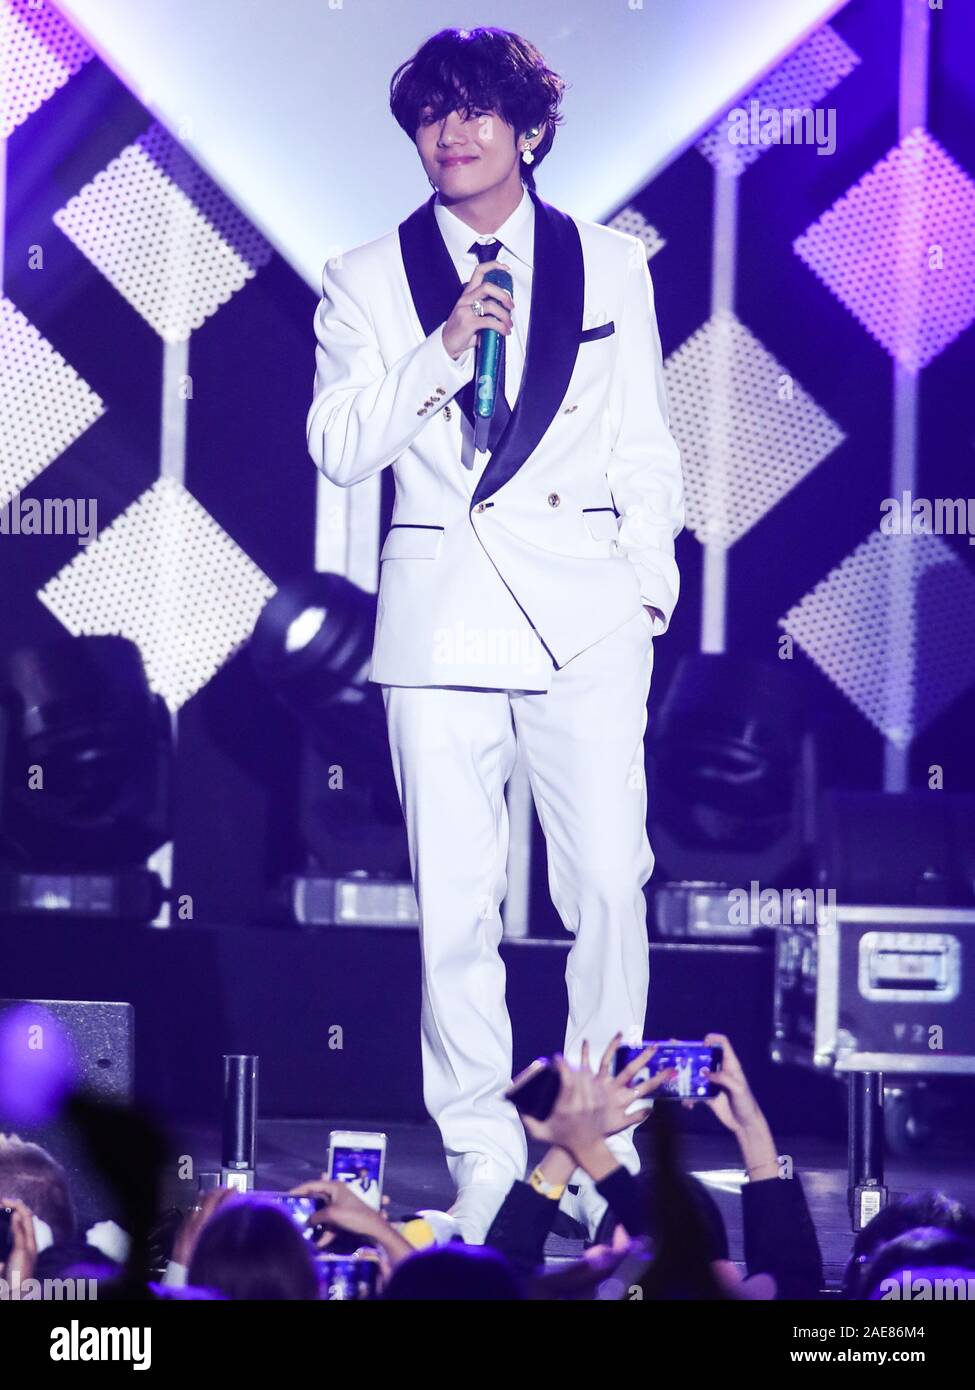 INGLEWOOD, LOS ANGELES, CALIFORNIA, USA - DECEMBER 06: Jin (Kim Seok-jin) of BTS performs at 102.7 KIIS FM's Jingle Ball 2019 held at The Forum on December 6, 2019 in Inglewood, Los Angeles, California, United States. (Photo by Xavier Collin/Image Press Agency) Stock Photo